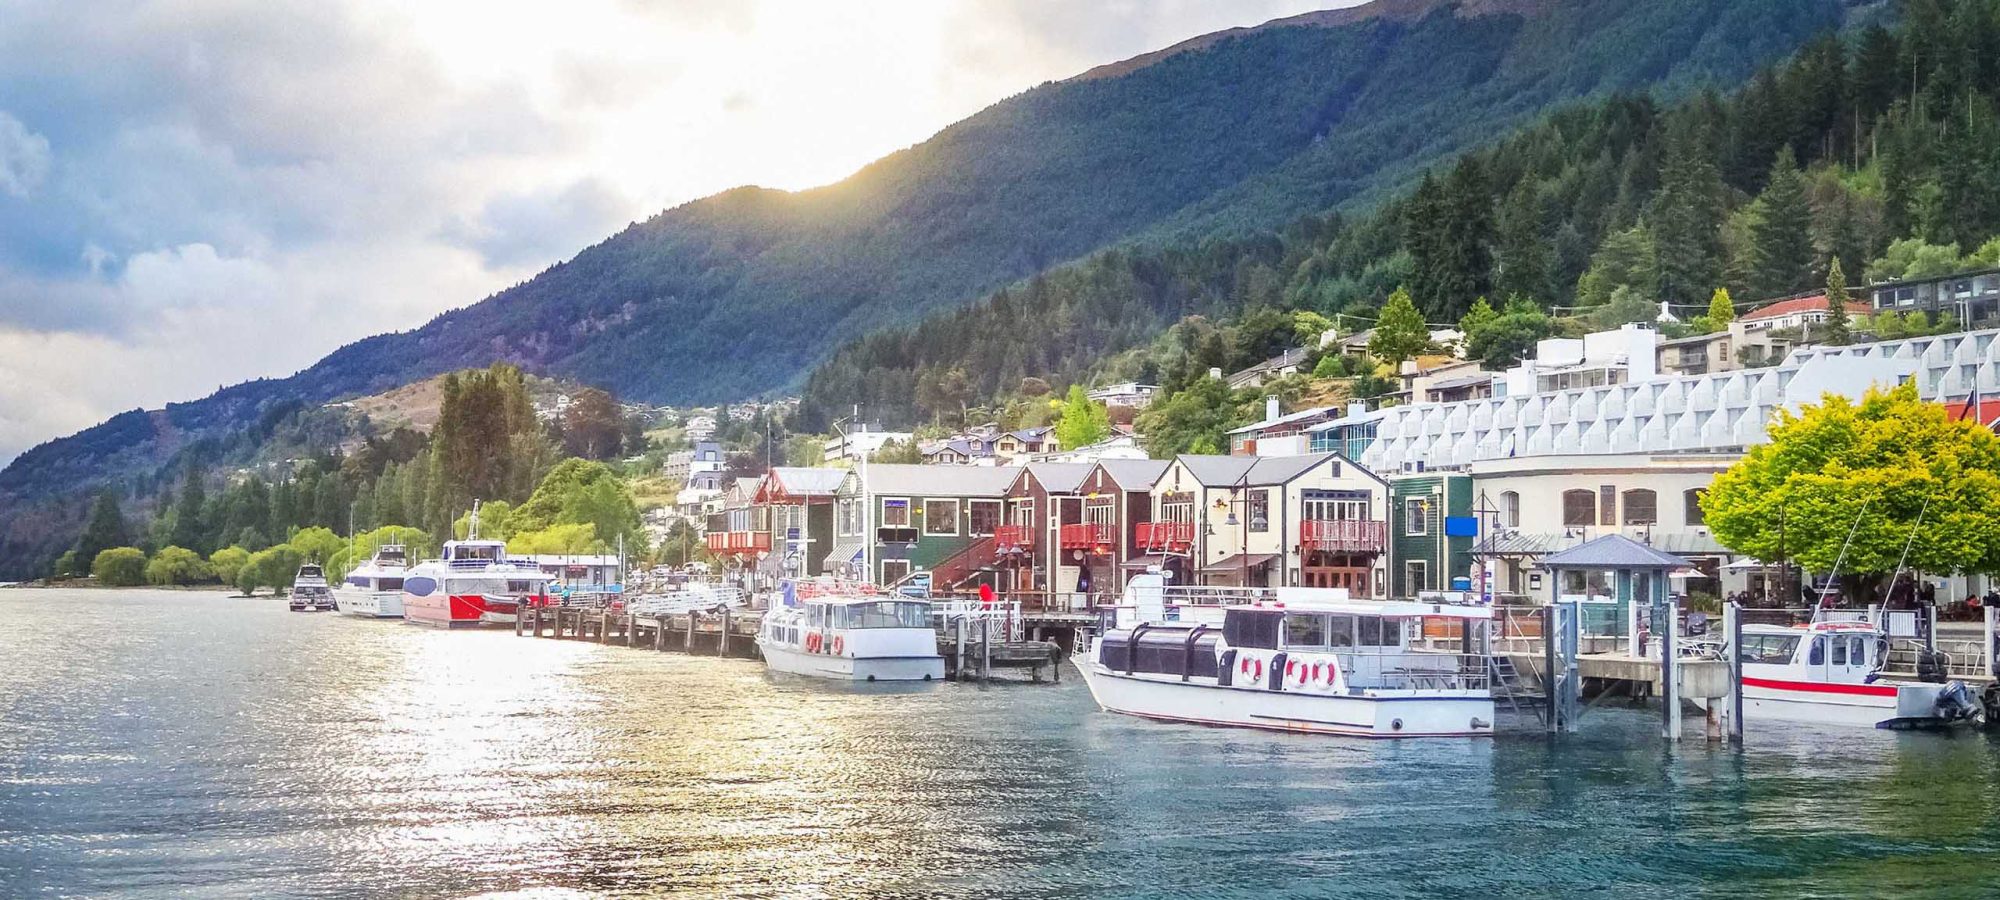 Queenstown South Island New Zealand during sunset